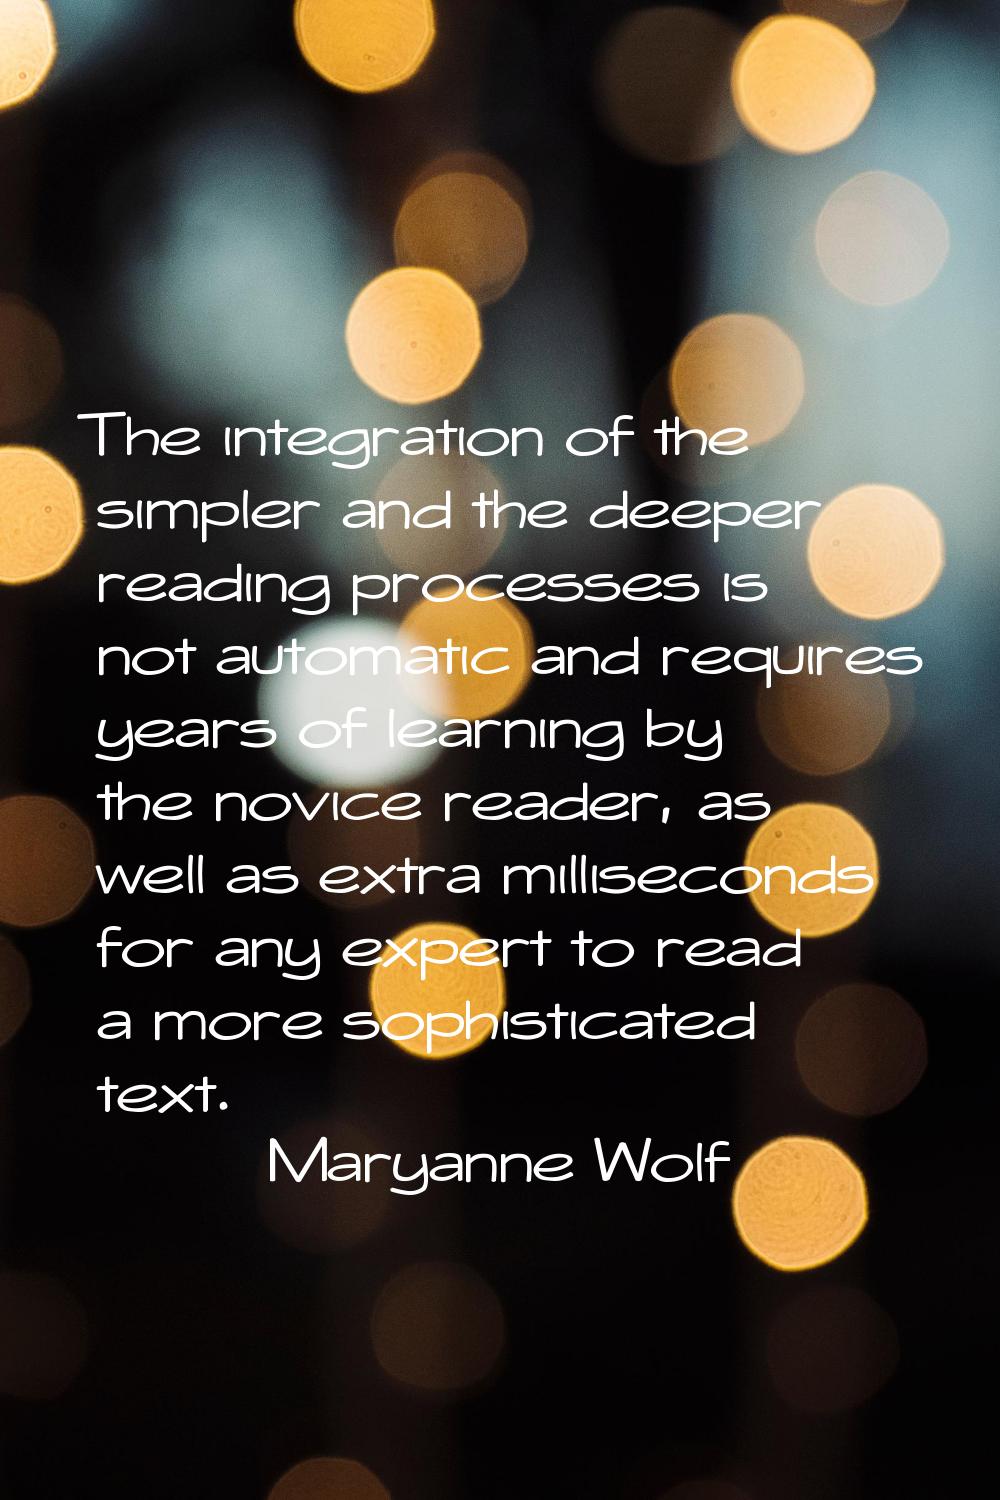 The integration of the simpler and the deeper reading processes is not automatic and requires years